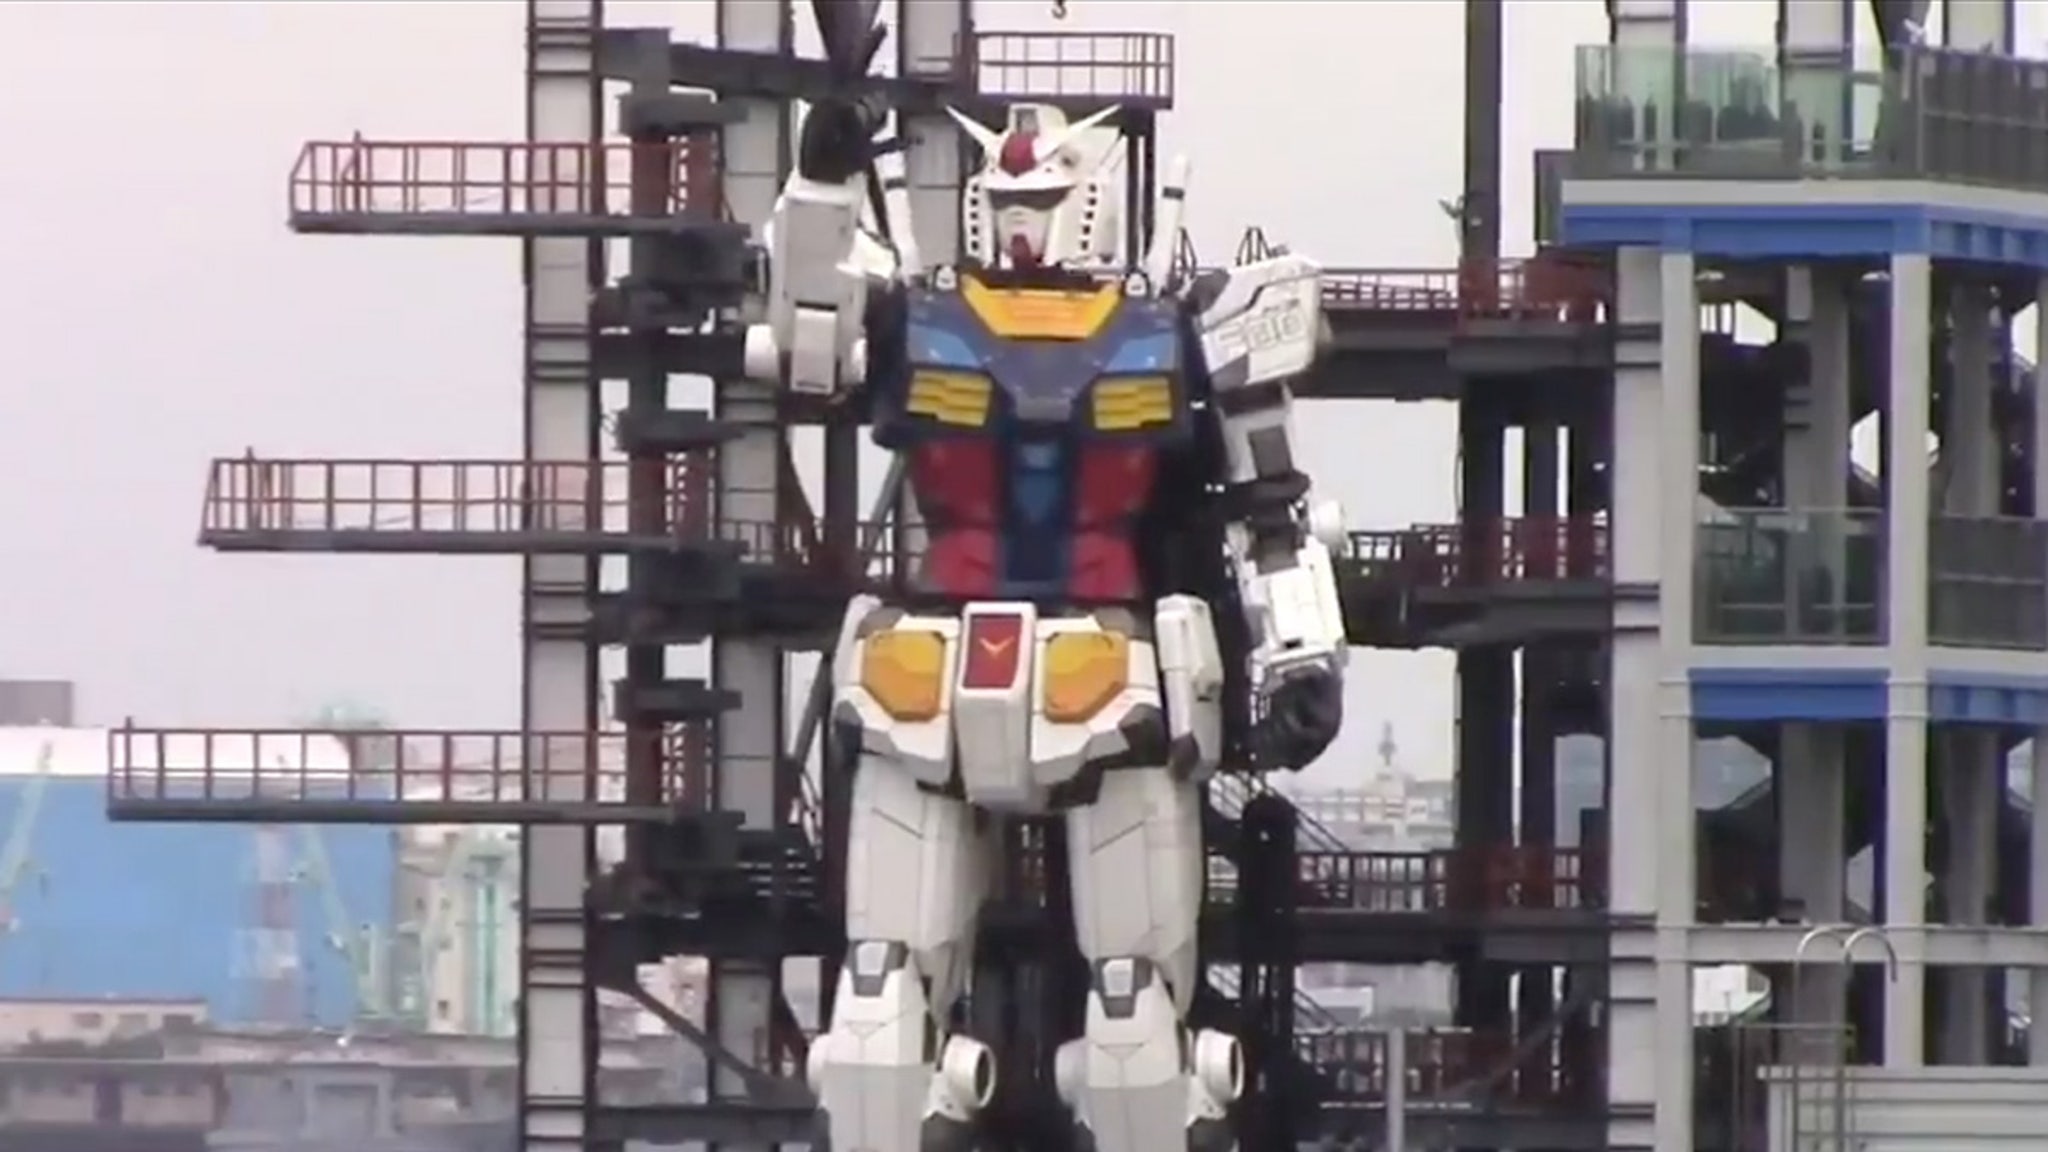 Life Size Gundam Robot Replica In Japan Can Now Move Around 